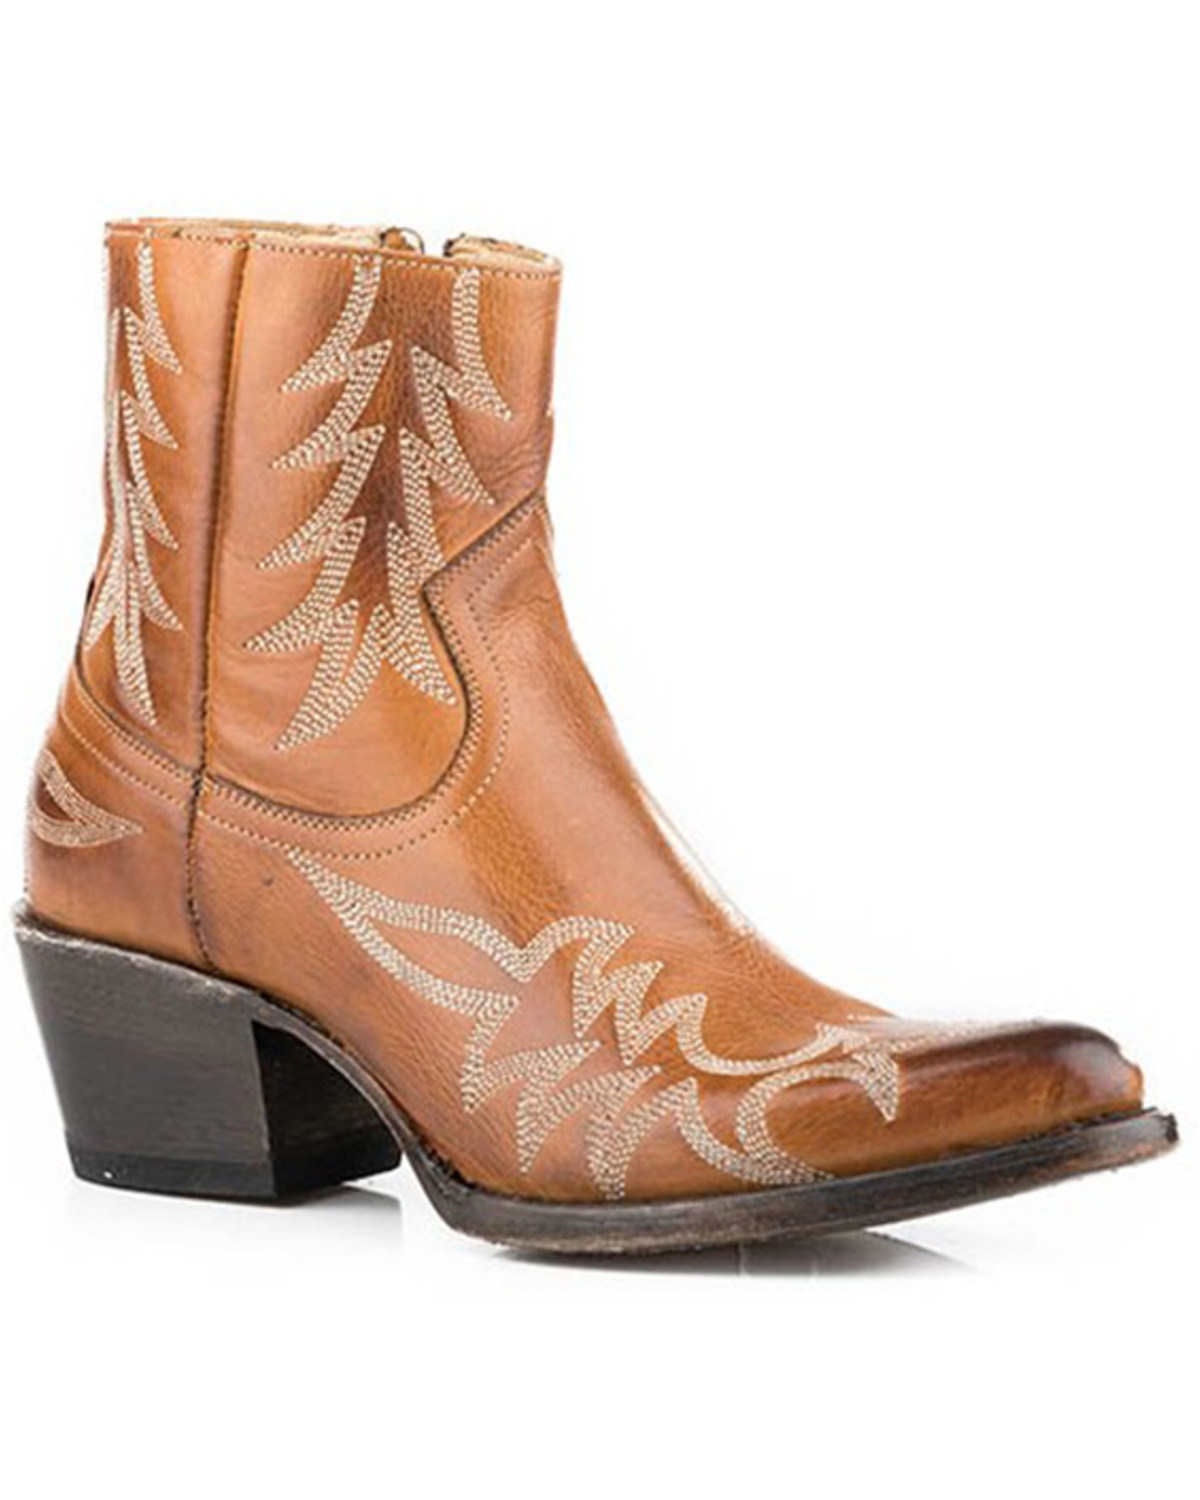 Stetson Women's Gianna Western Booties - Pointed Toe